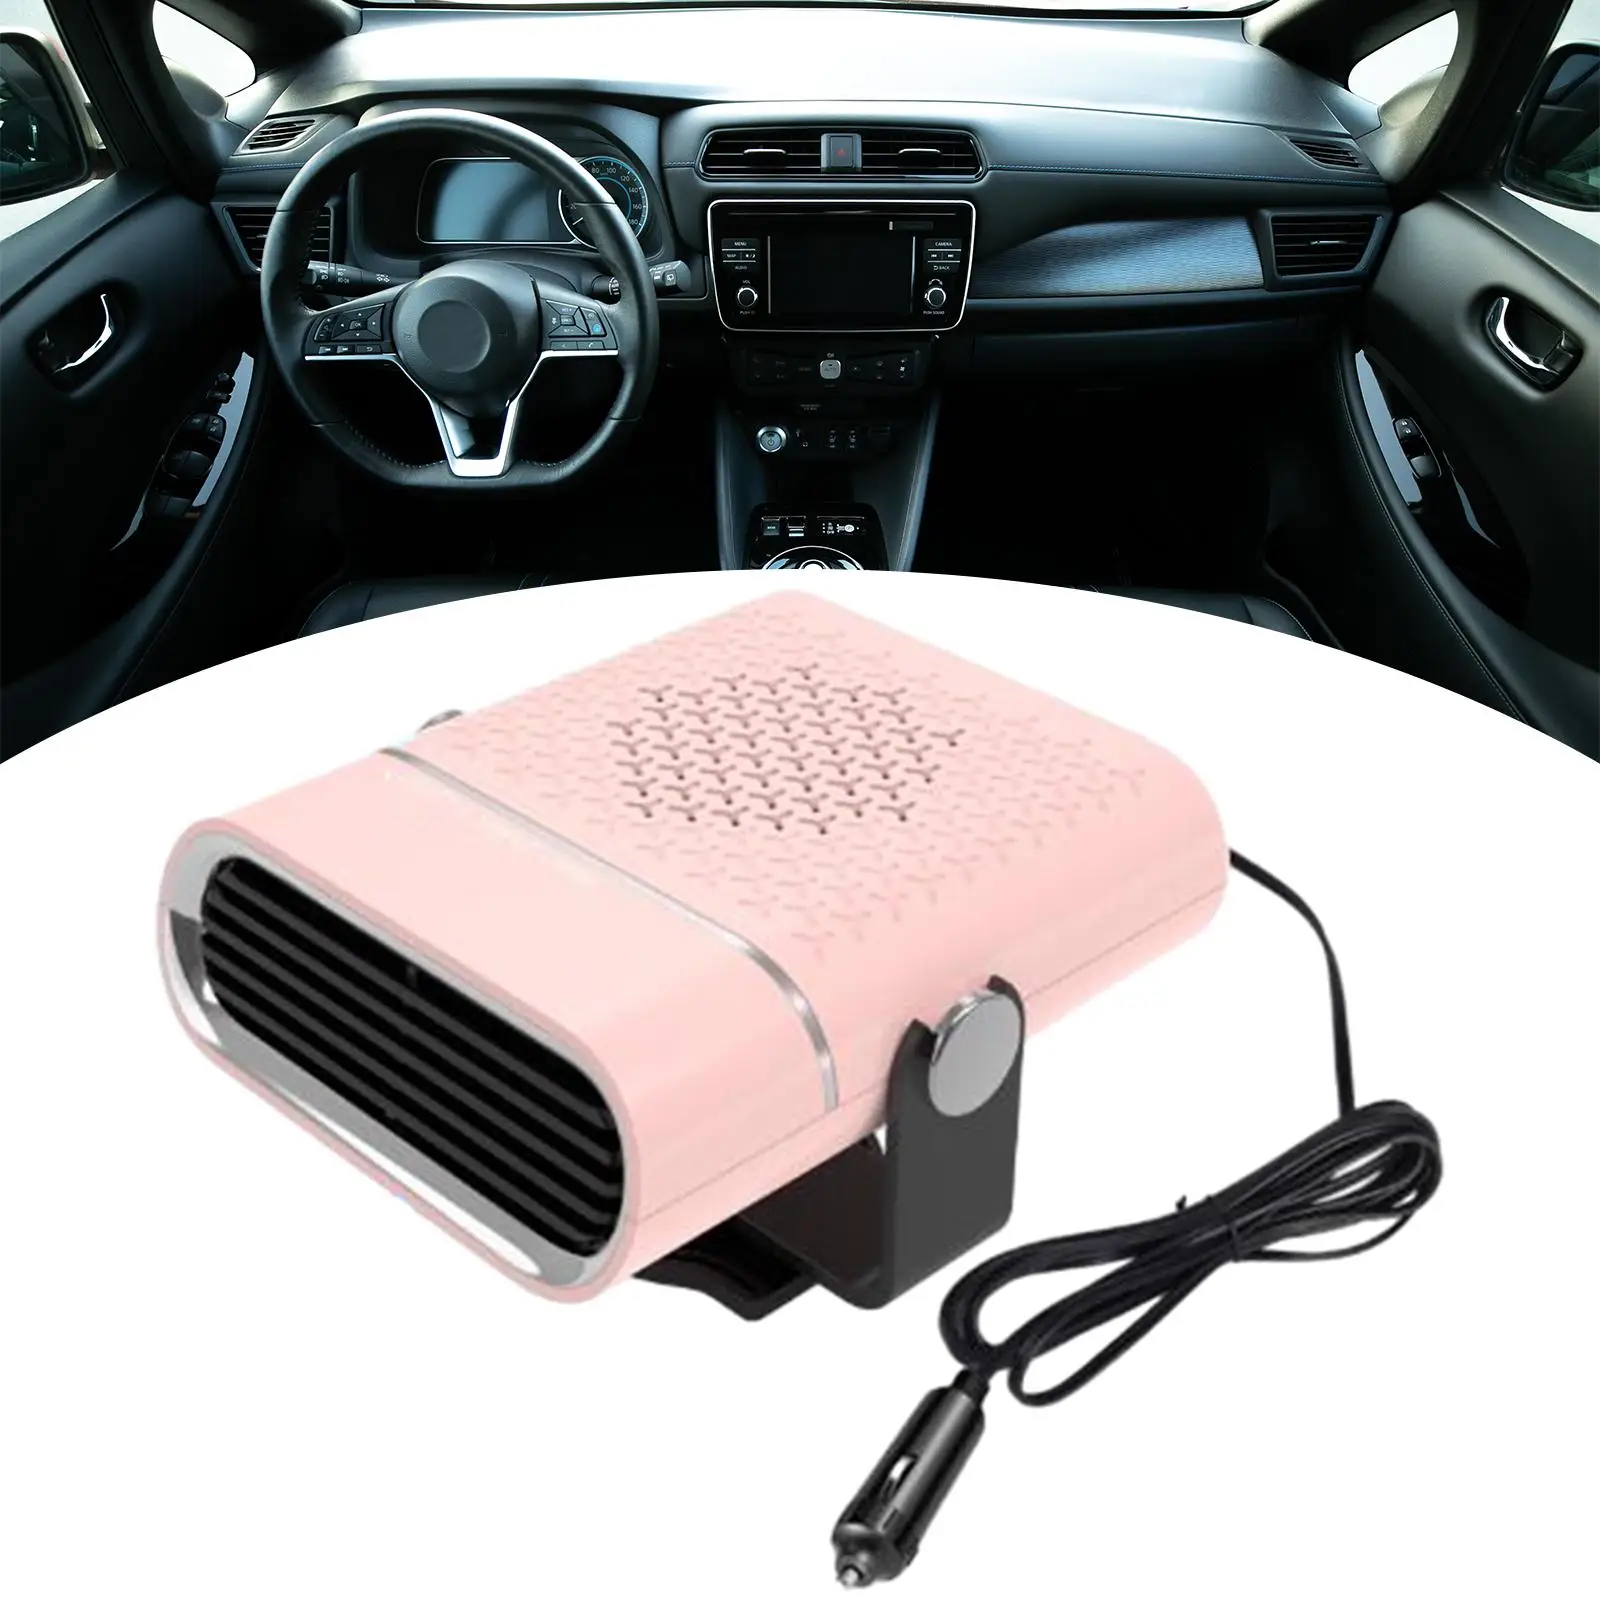 Car Heater 24V Windshield Defroster 360 Degree Rotary Auto Vehicle Heater Automobile Windscreen Car Fan Car Heater and Defroster